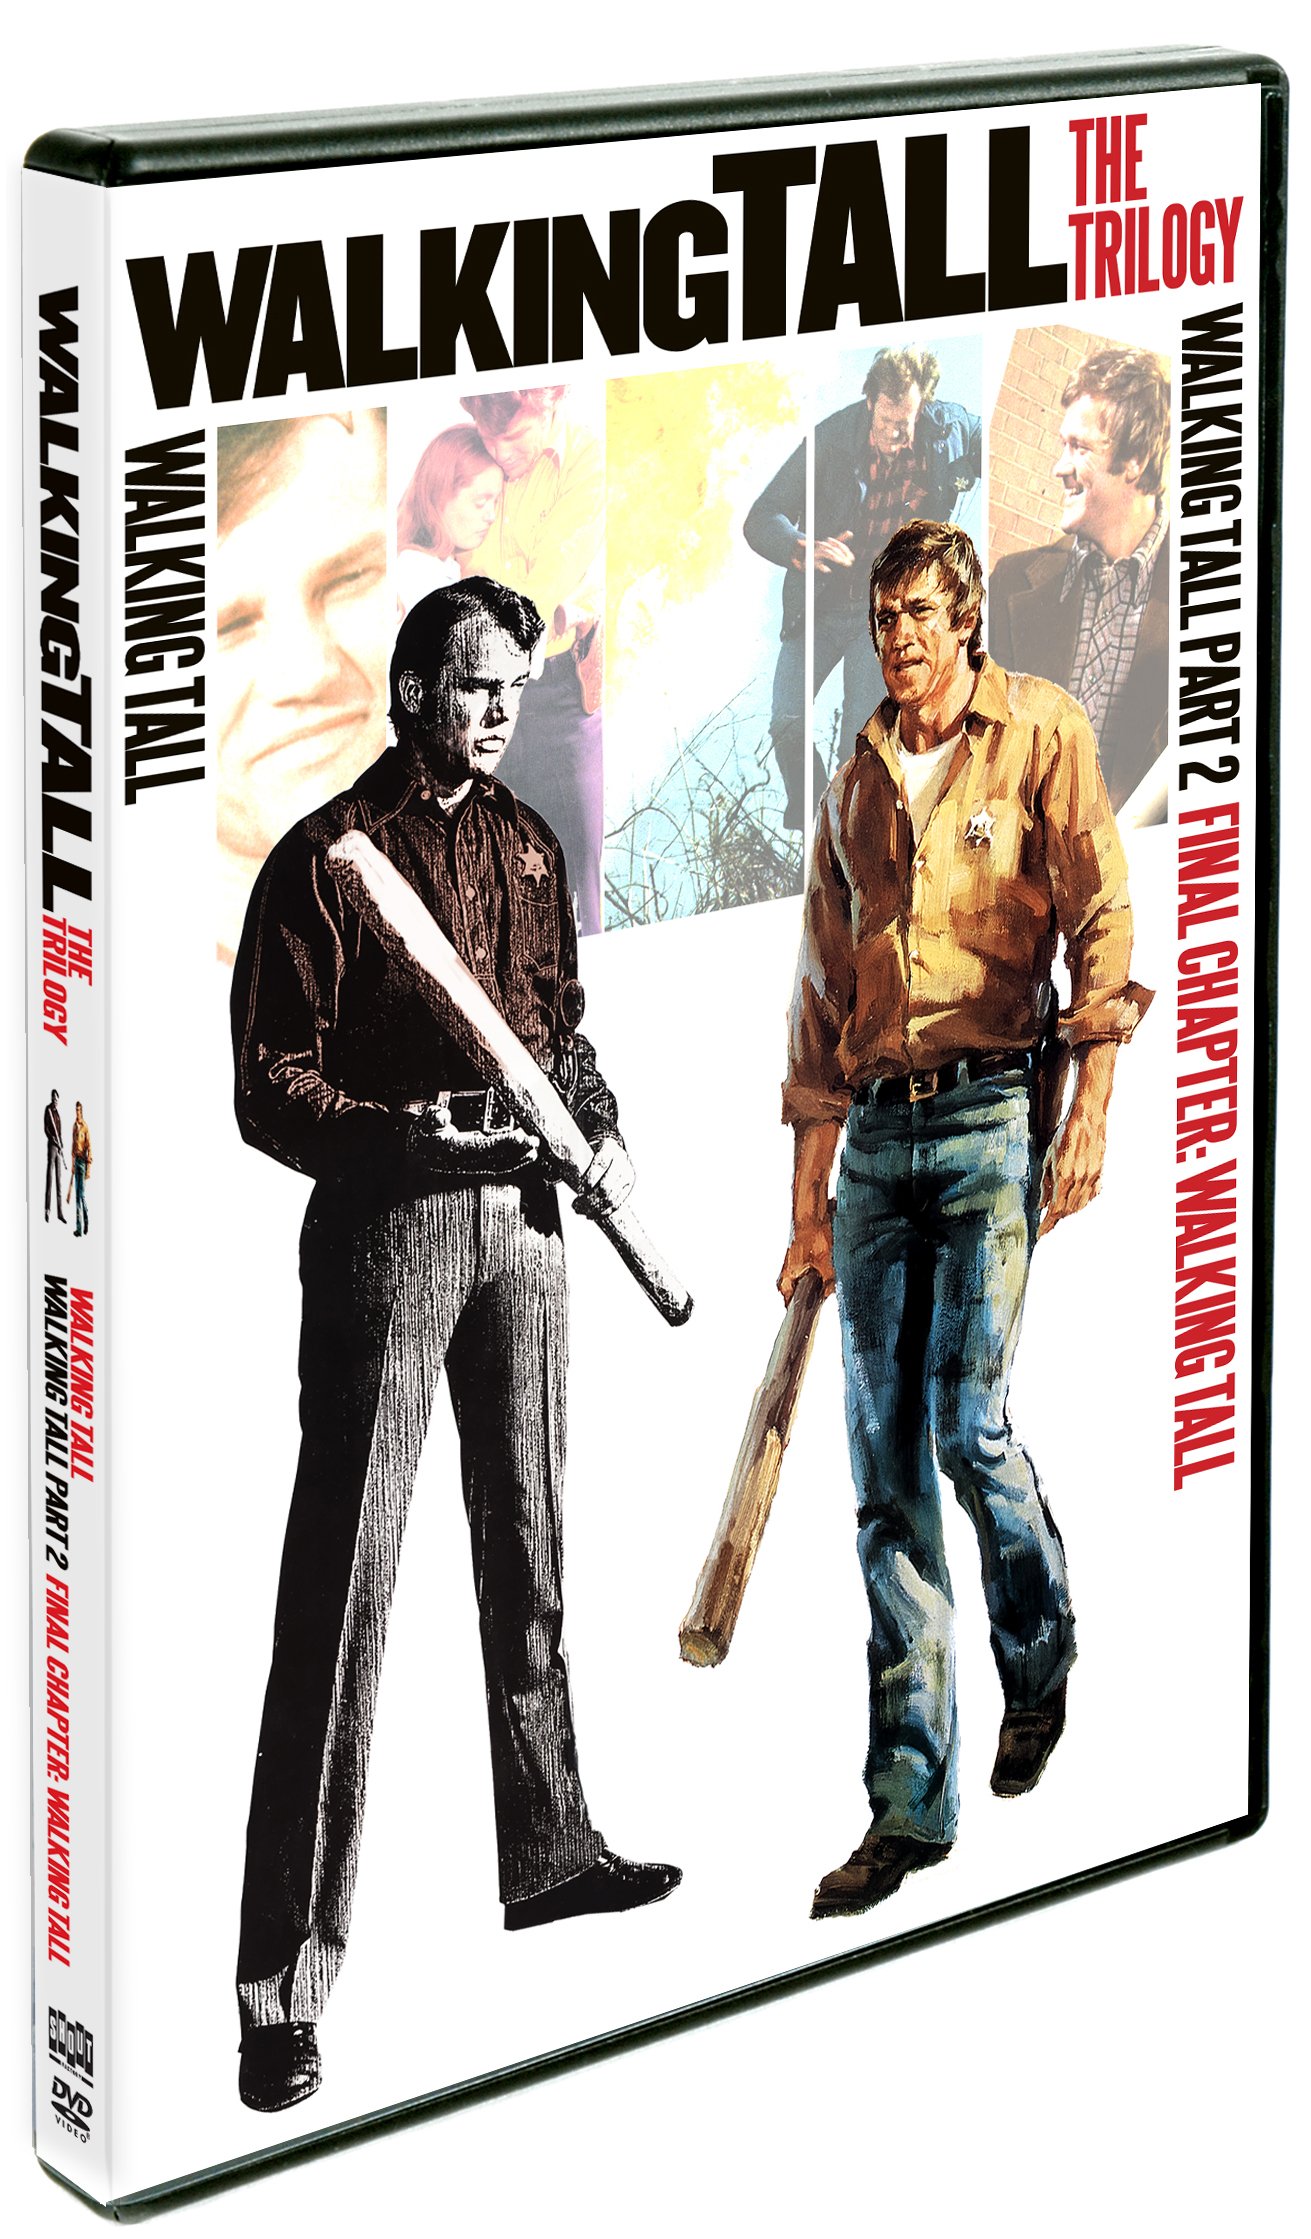 Walking Tall: The Trilogy (DVD) - image 3 of 4